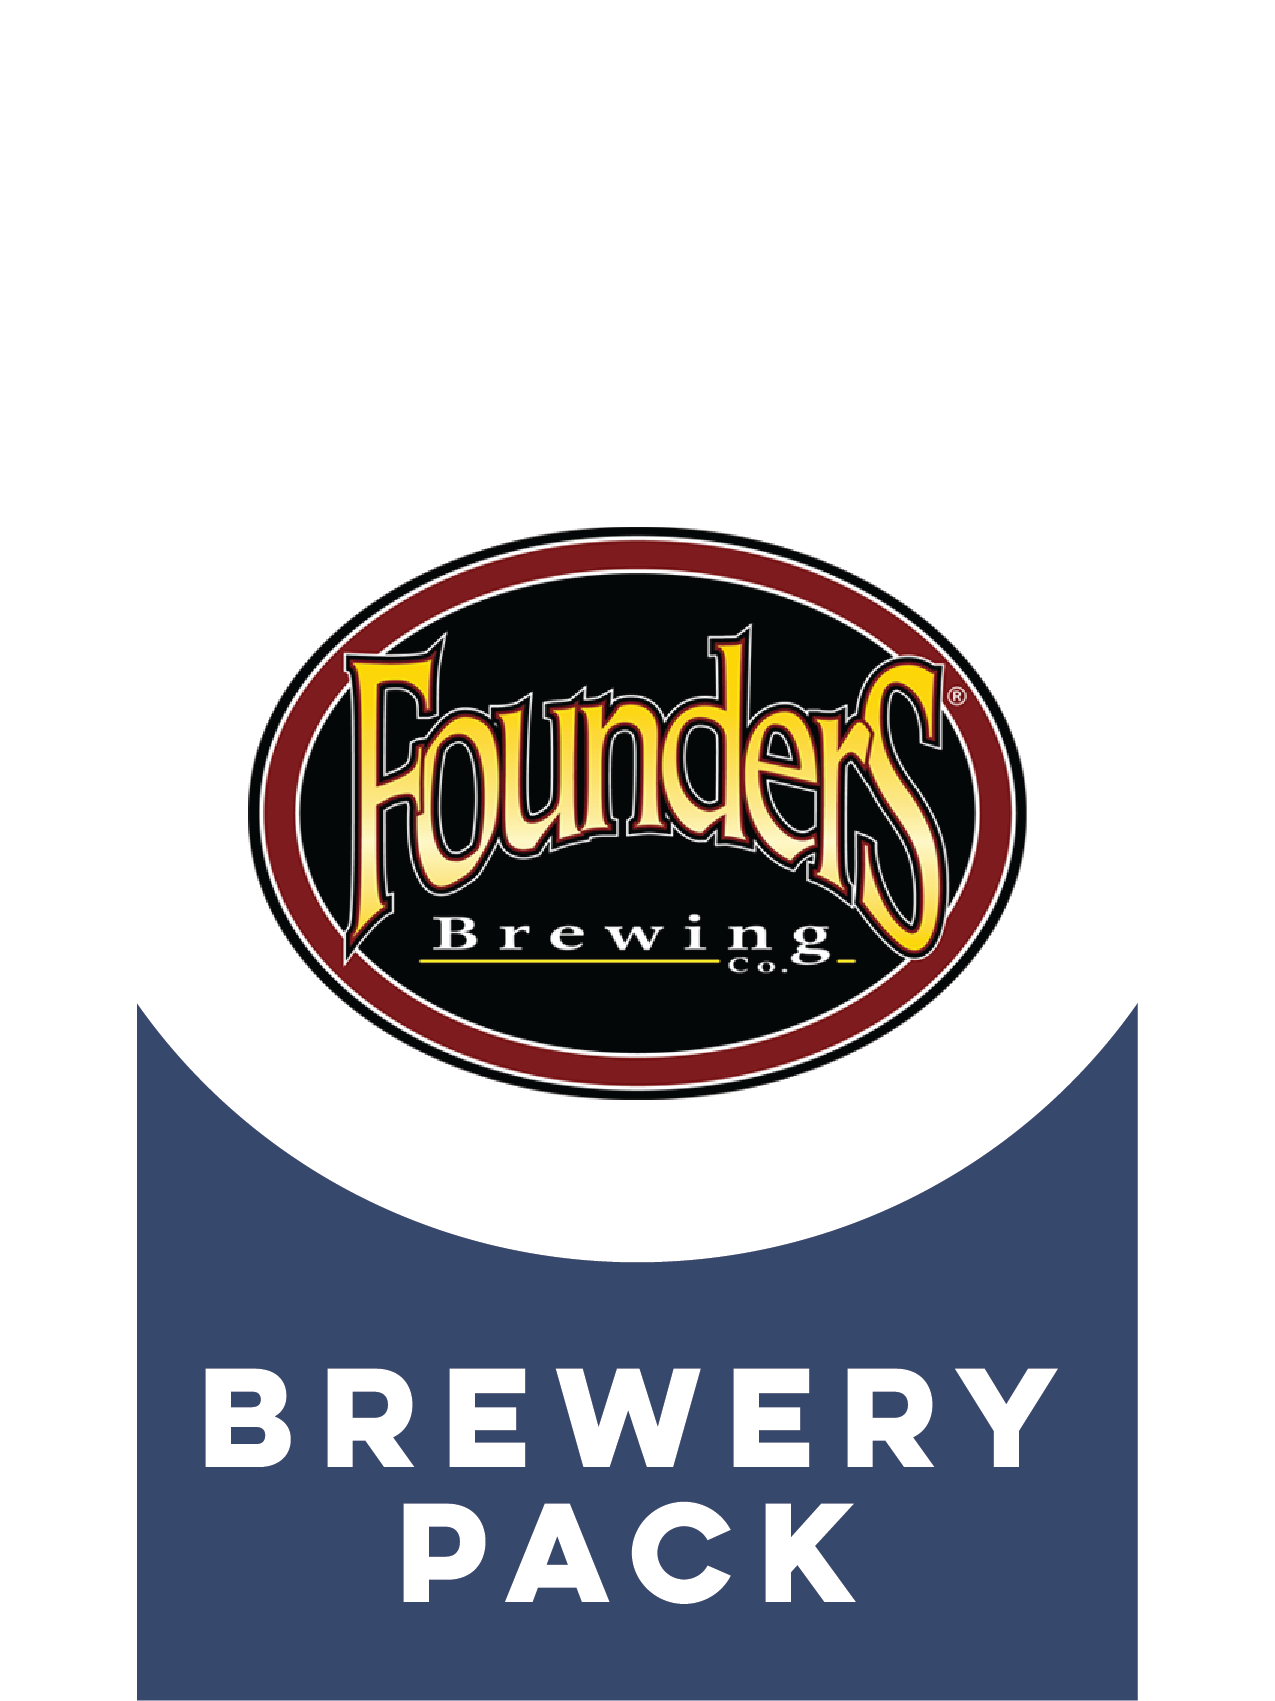 -Founders- Founders Brewery Pack Mas Agave Edition-Packs & Cases- Only @ Beer Republic - The best online beer store for American & Canadian craft beer - Buy beer online from the USA and Canada - Bier online kopen - Amerikaans bier kopen - Craft beer store - Craft beer kopen - Amerikanisch bier kaufen - Bier online kaufen - Acheter biere online - IPA - Stout - Porter - New England IPA - Hazy IPA - Imperial Stout - Barrel Aged - Barrel Aged Imperial Stout - Brown - Dark beer - Blond - Blonde - Pilsner - Lager